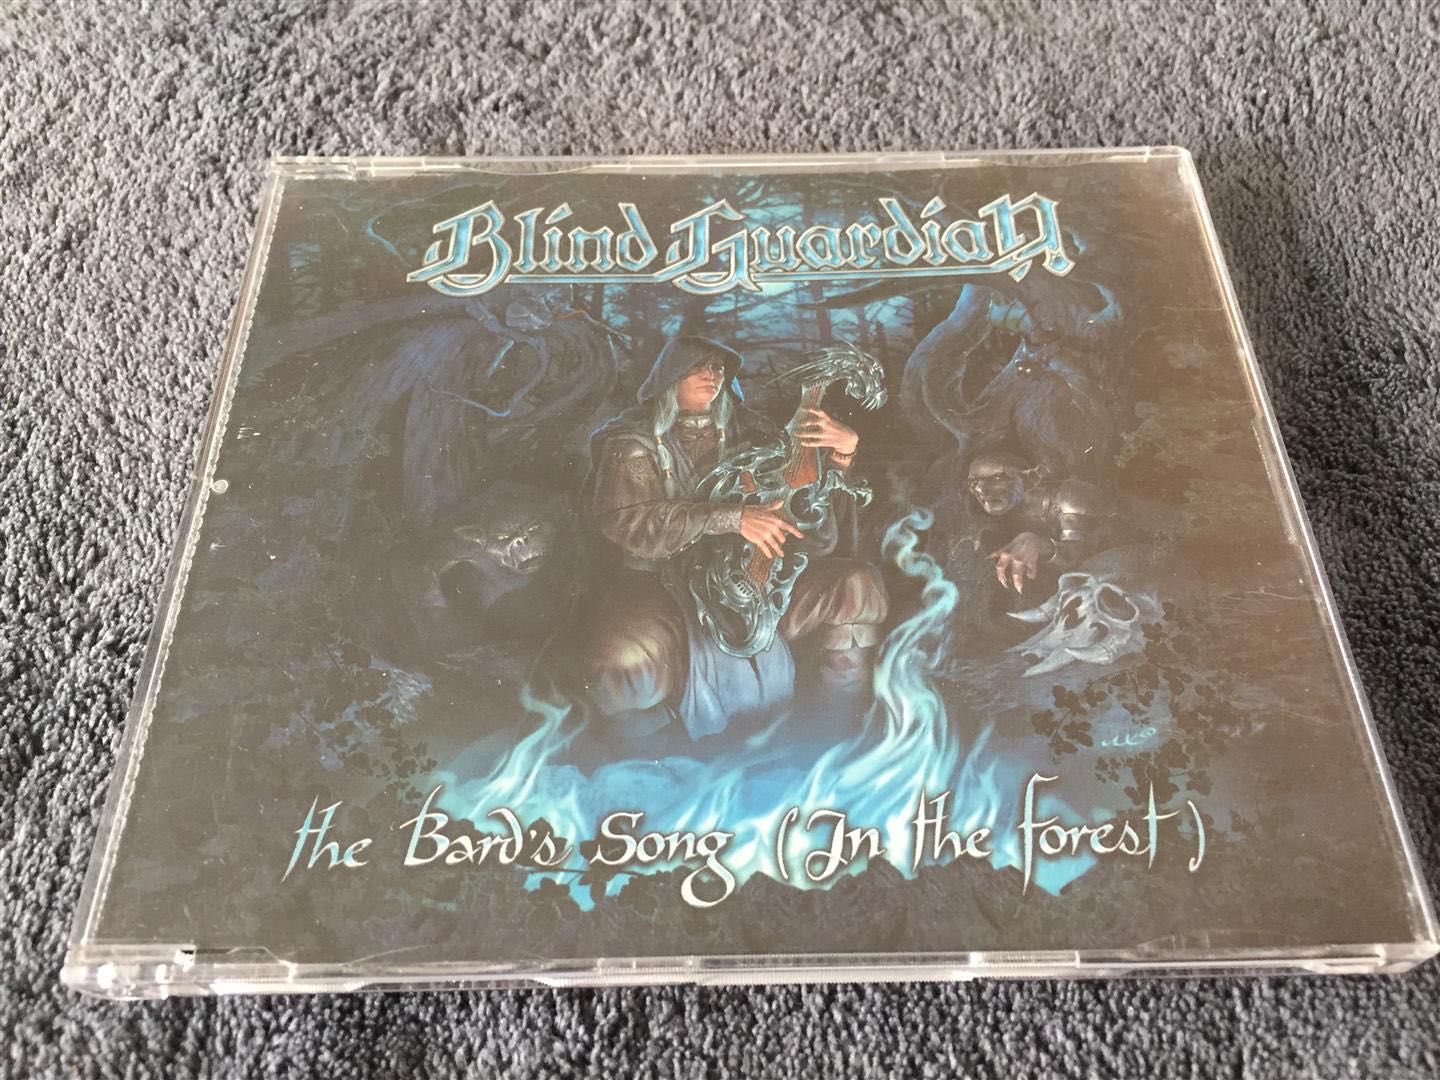 Blind Guardian - The Bard's Song (In The Forest) Picture CD RAR